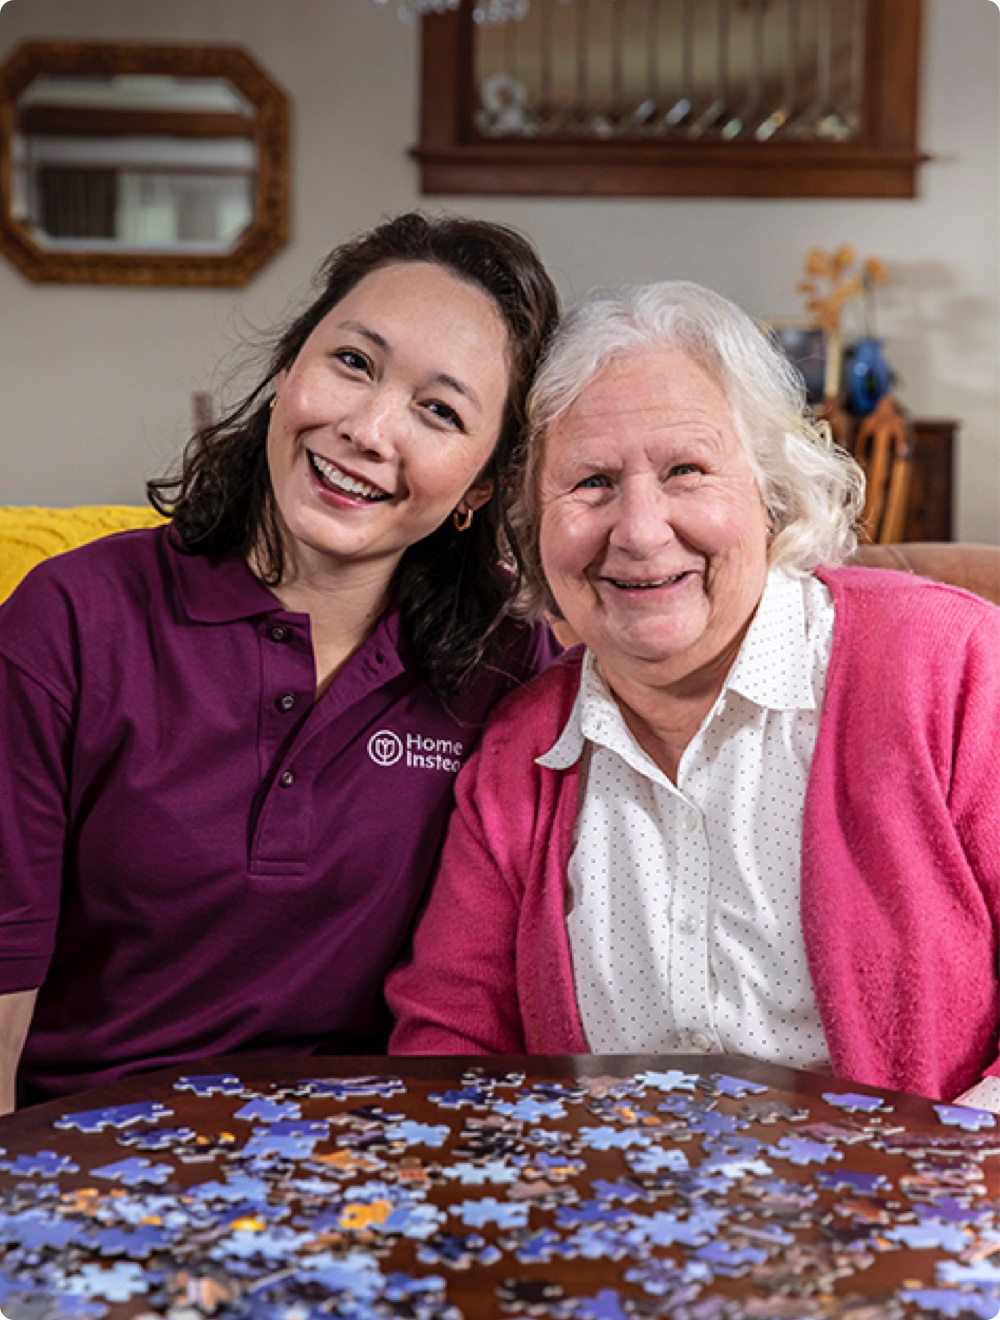 Join us for a meaningful career in home care